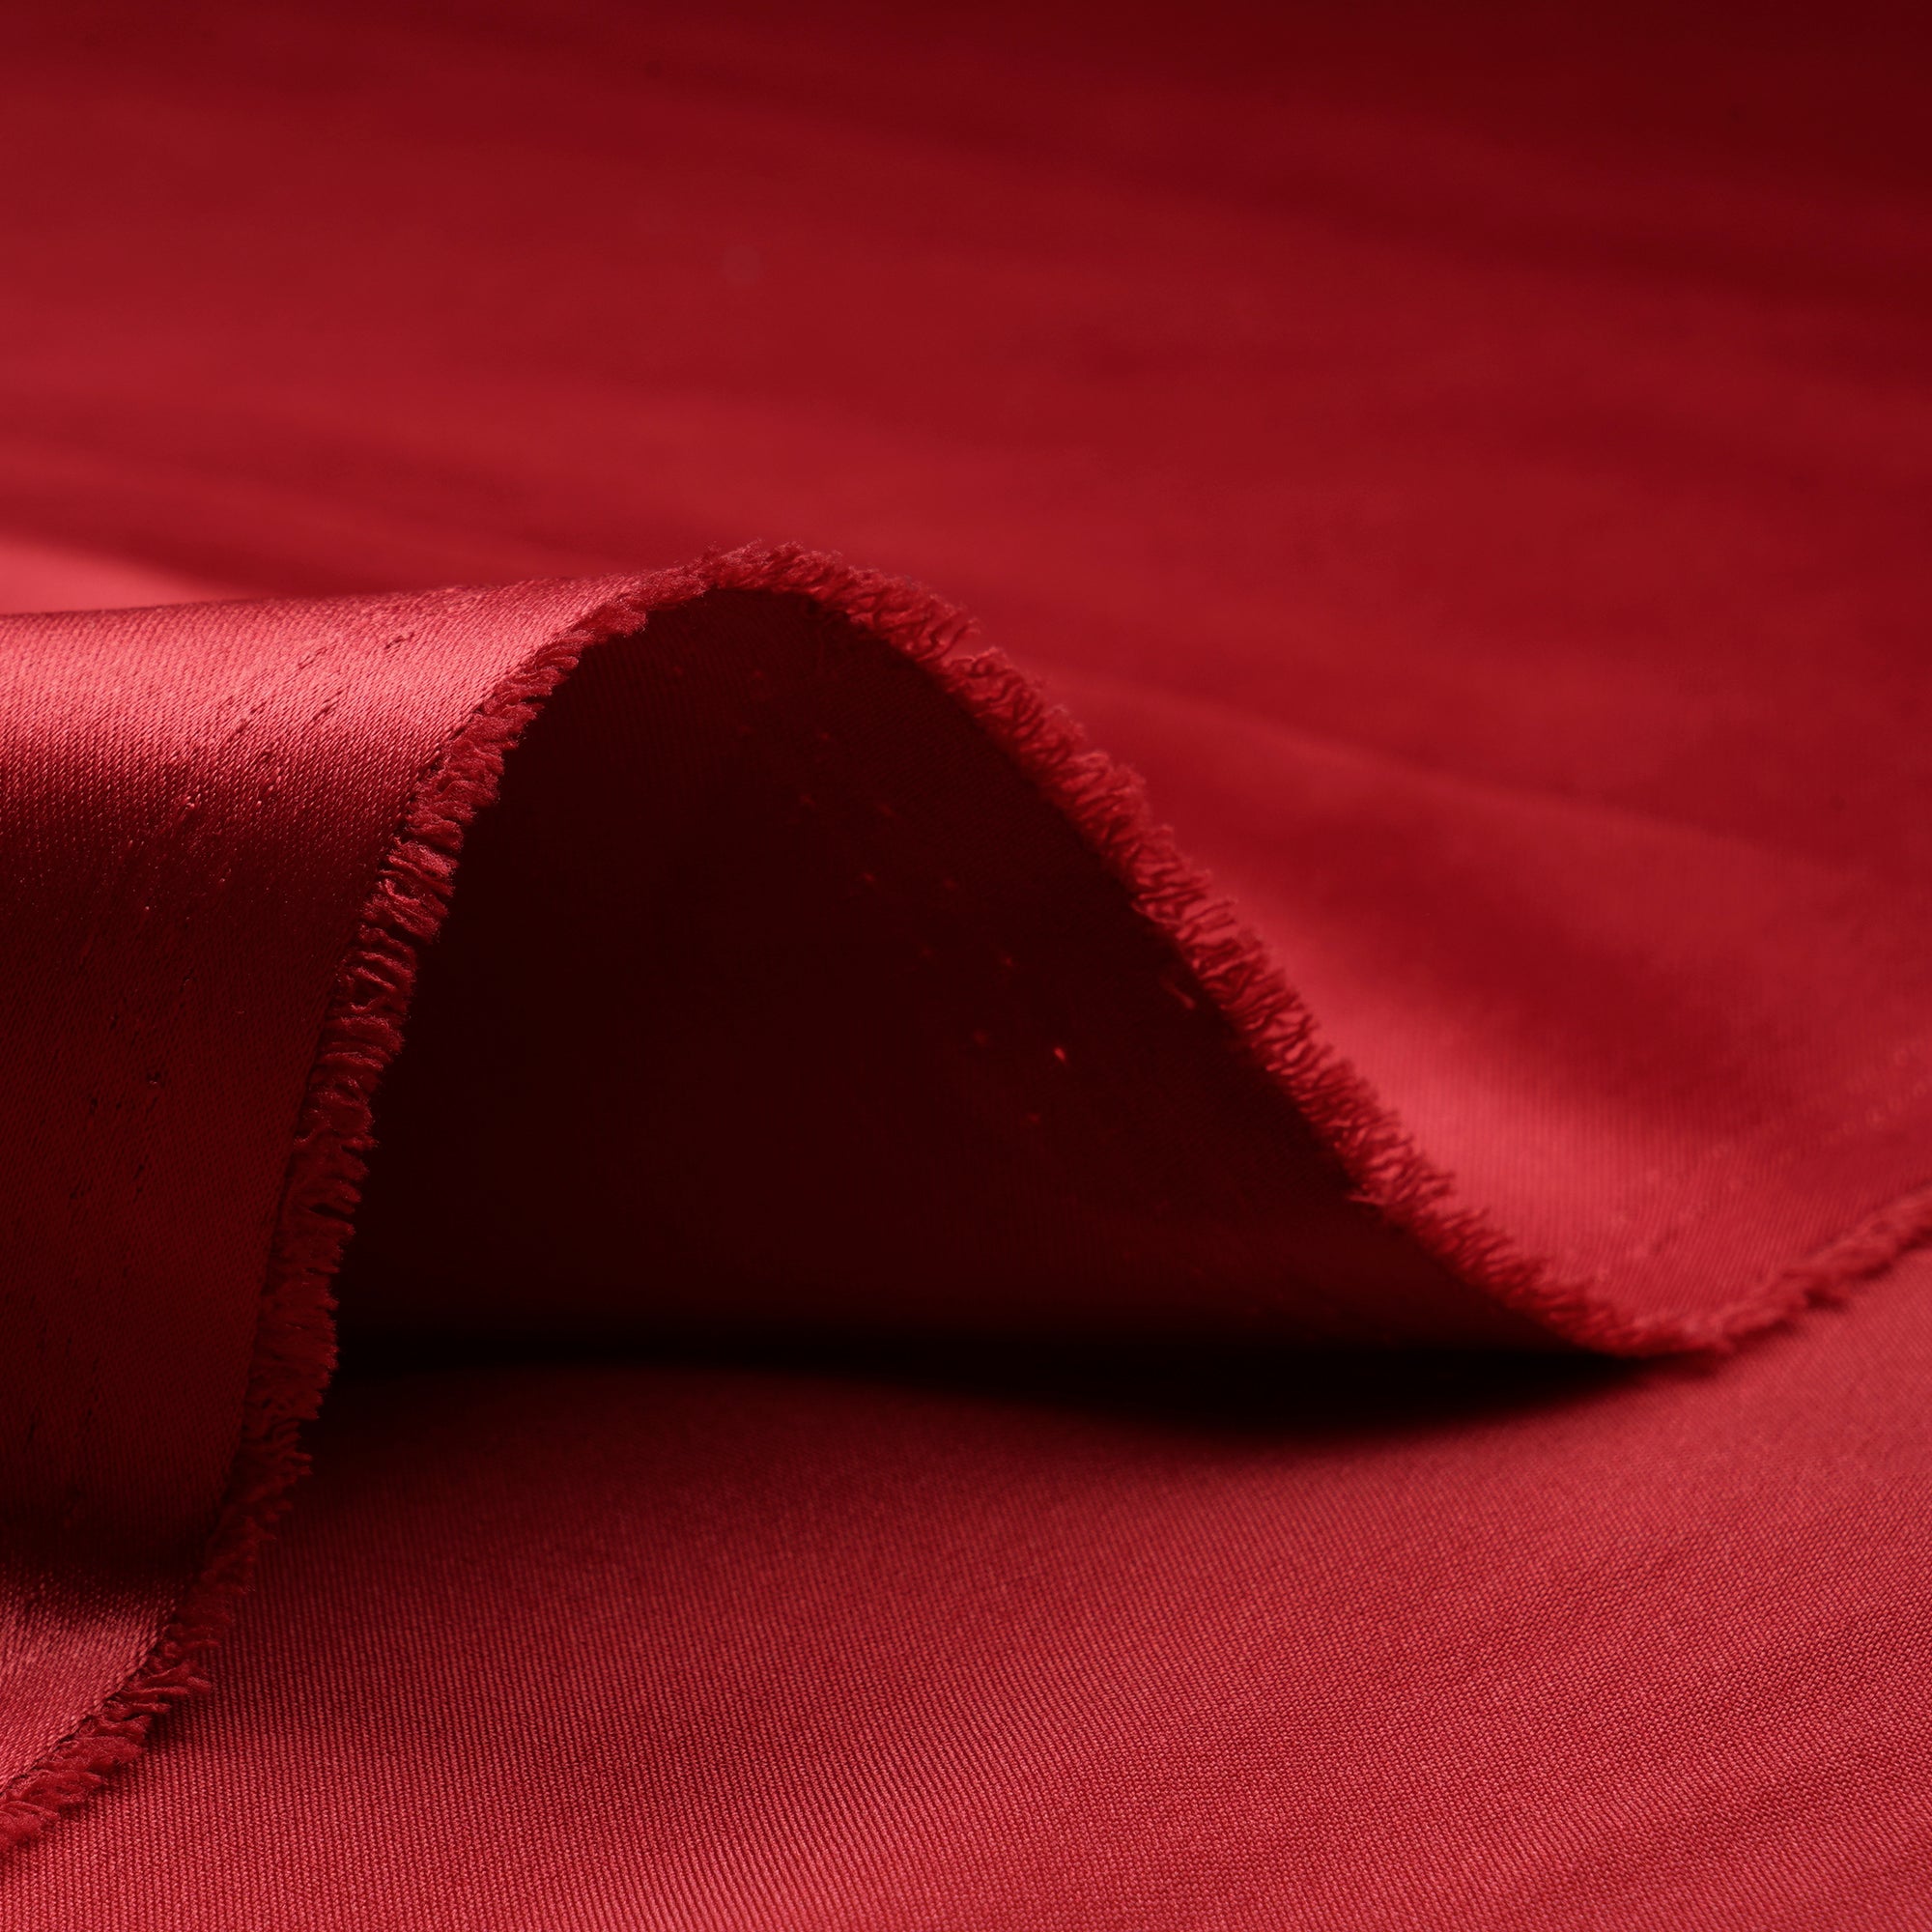 Maroon Solid Dyed Imported Duchess Satin Fabric (60" Width)